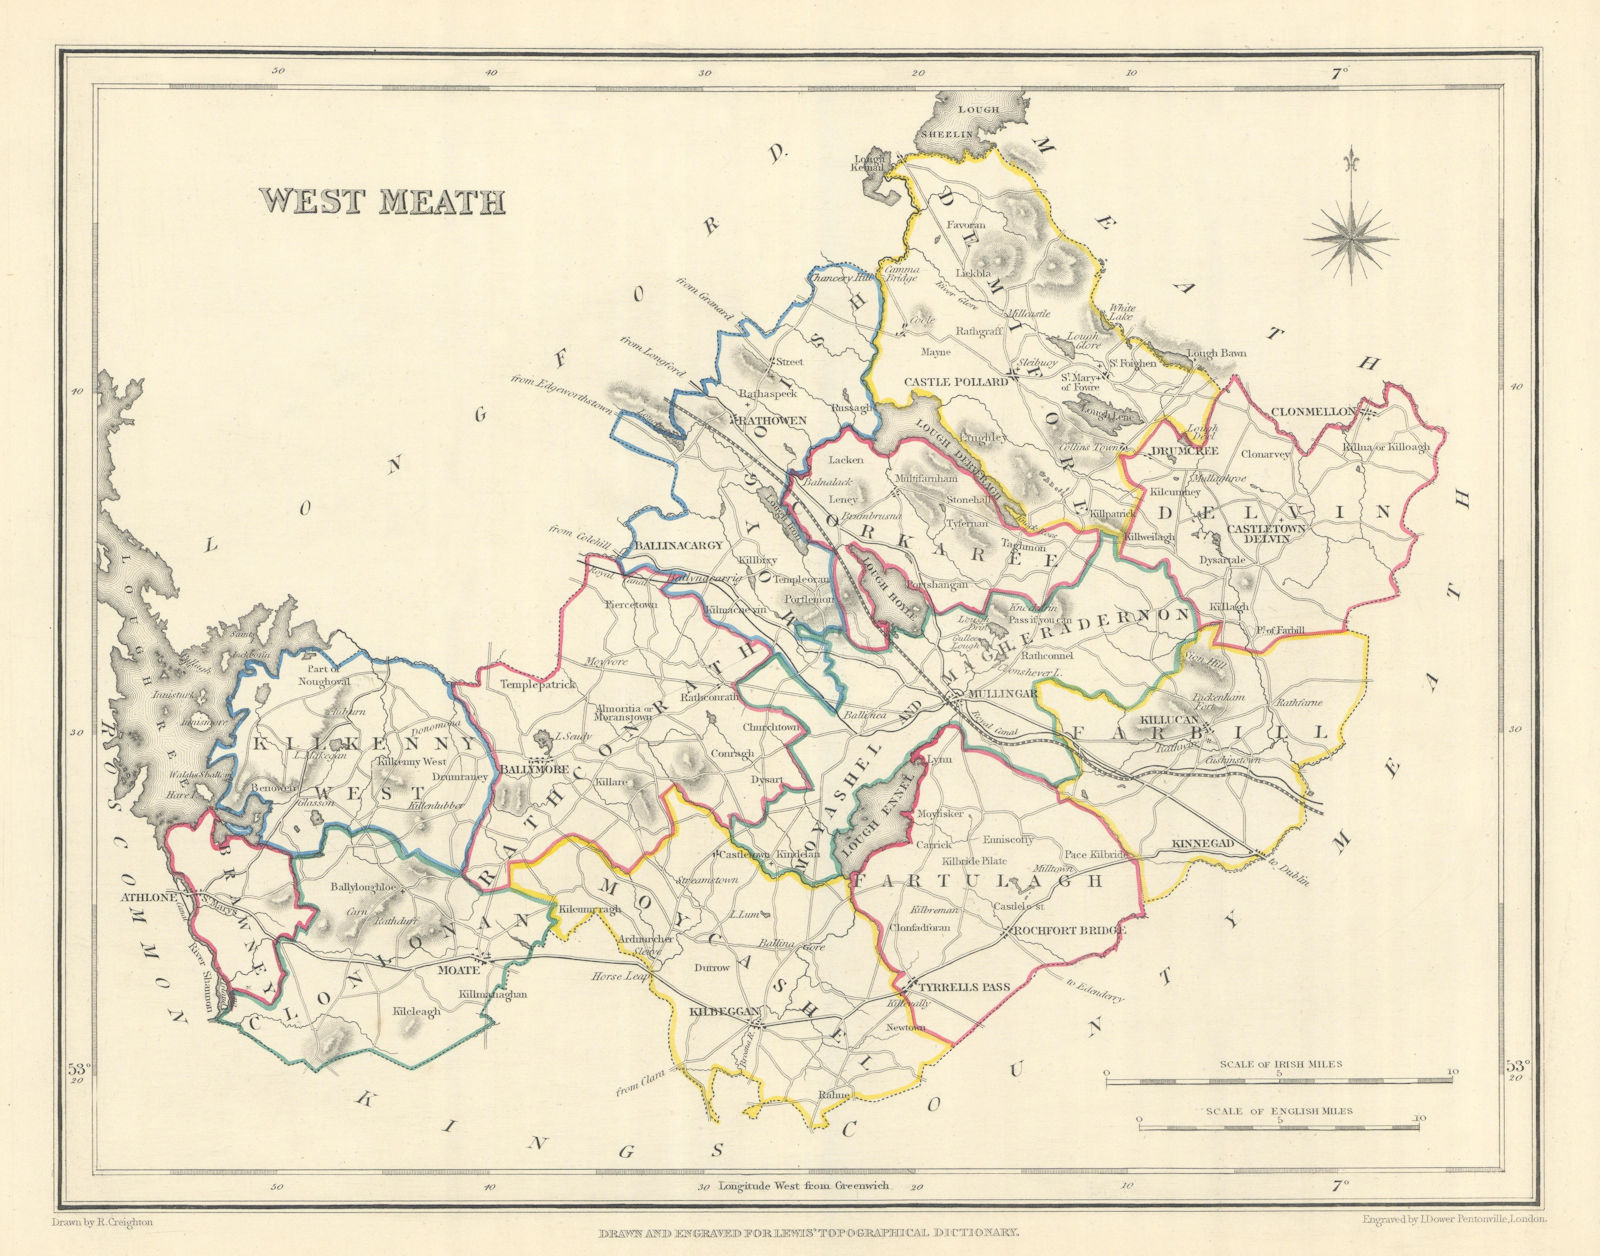 COUNTY WESTMEATH antique map for LEWIS by CREIGHTON & DOWER. Ireland 1850